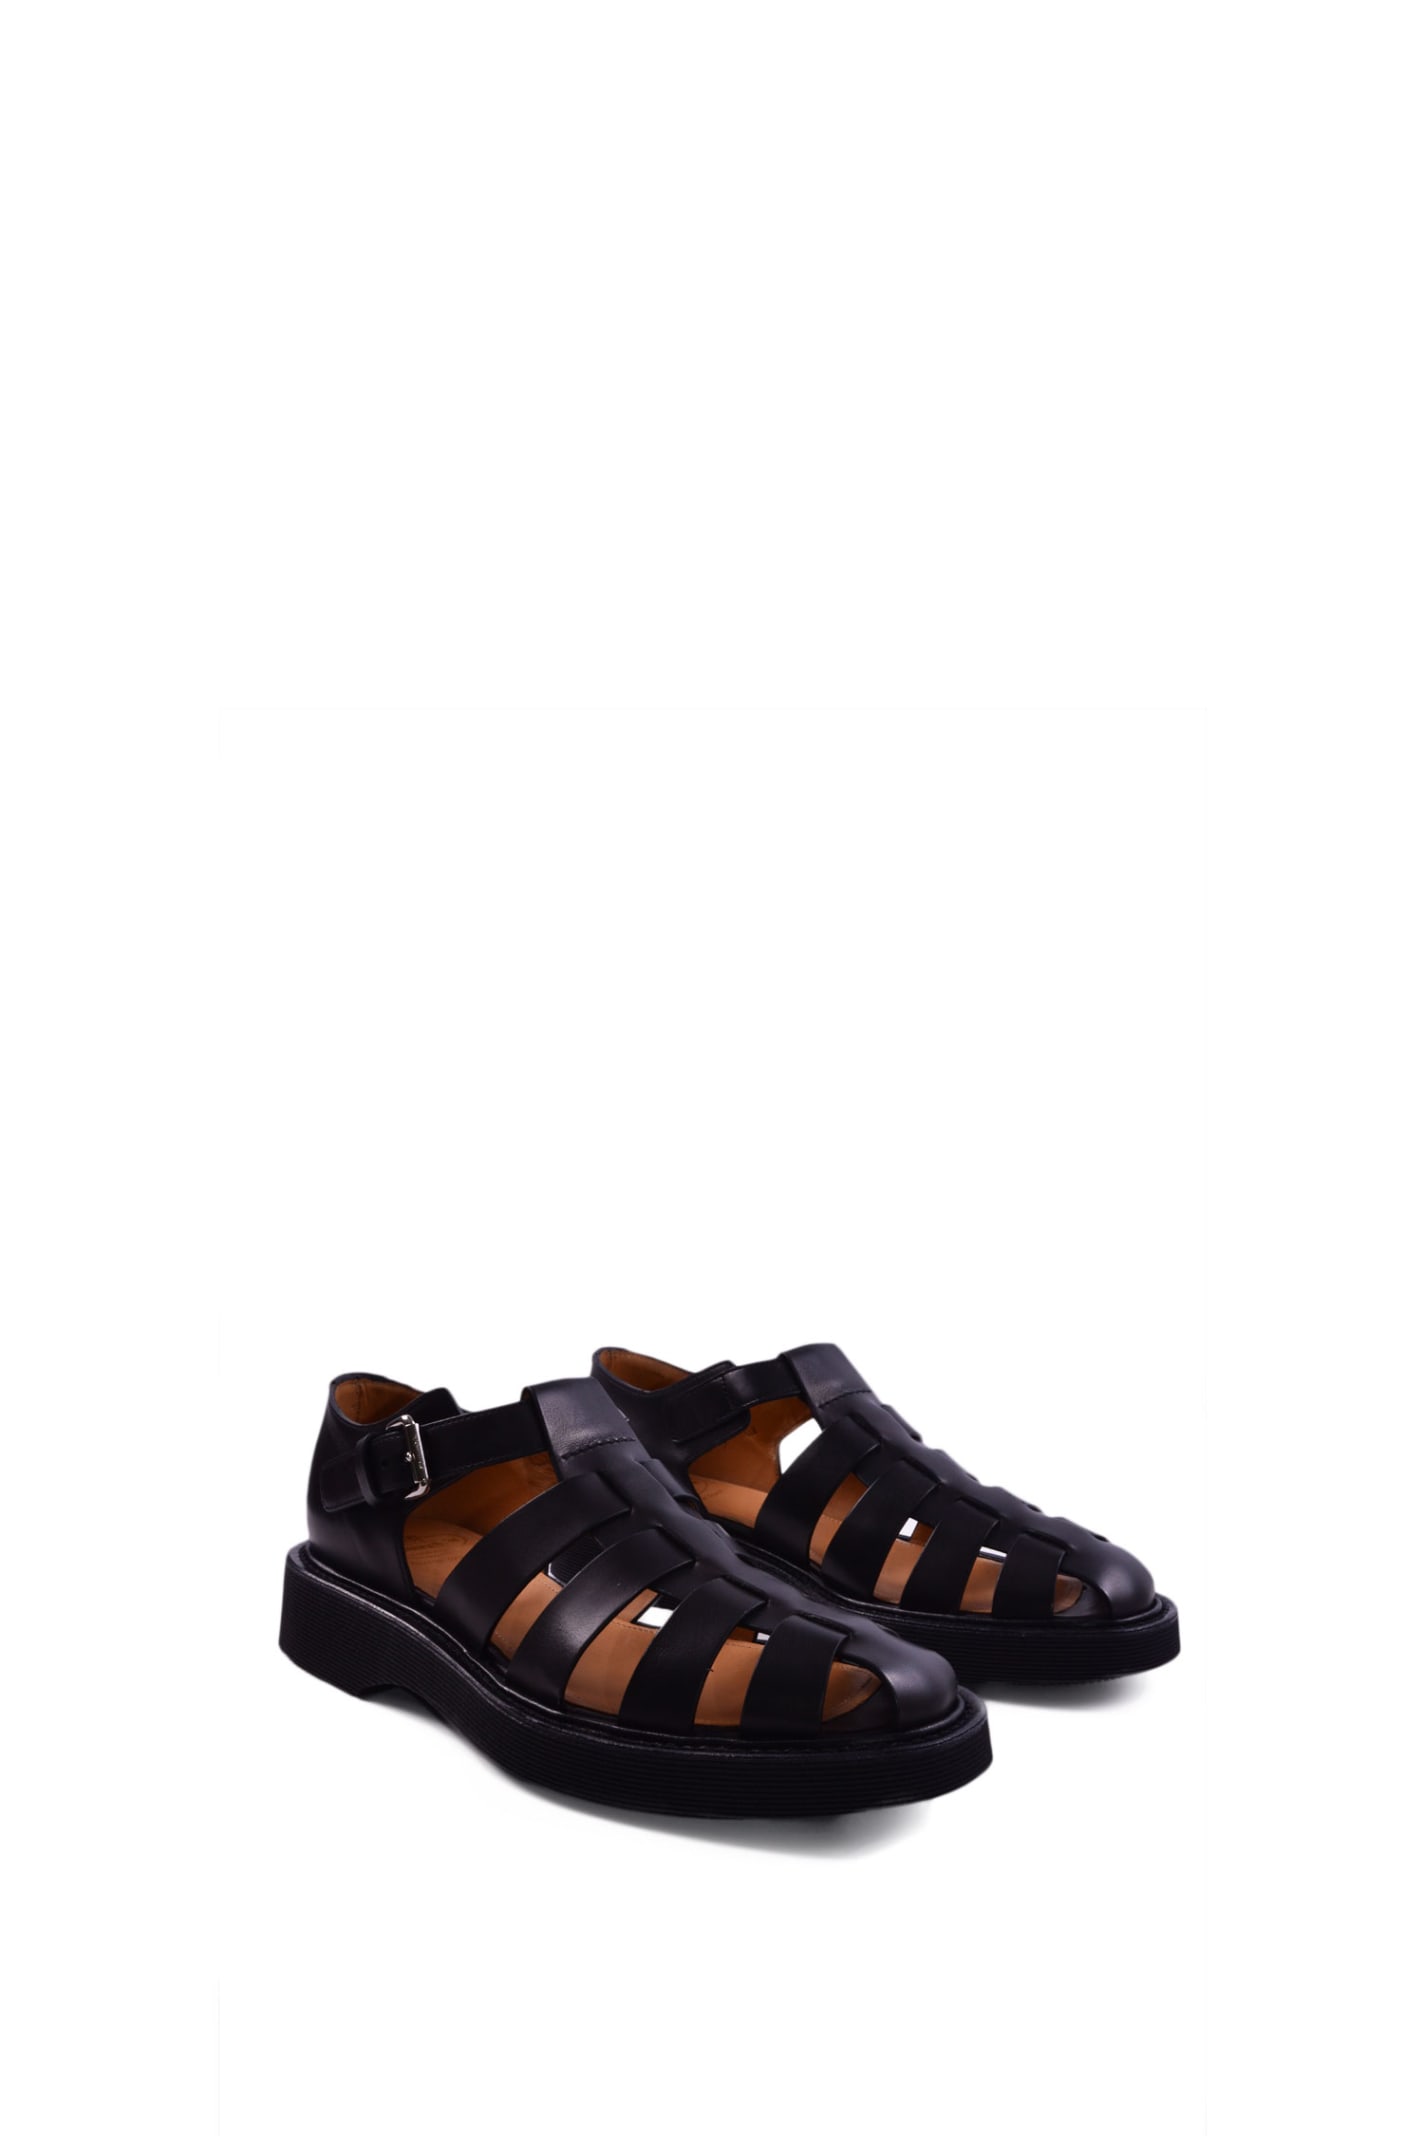 Shop Church's Hove Leather Sandal In Black